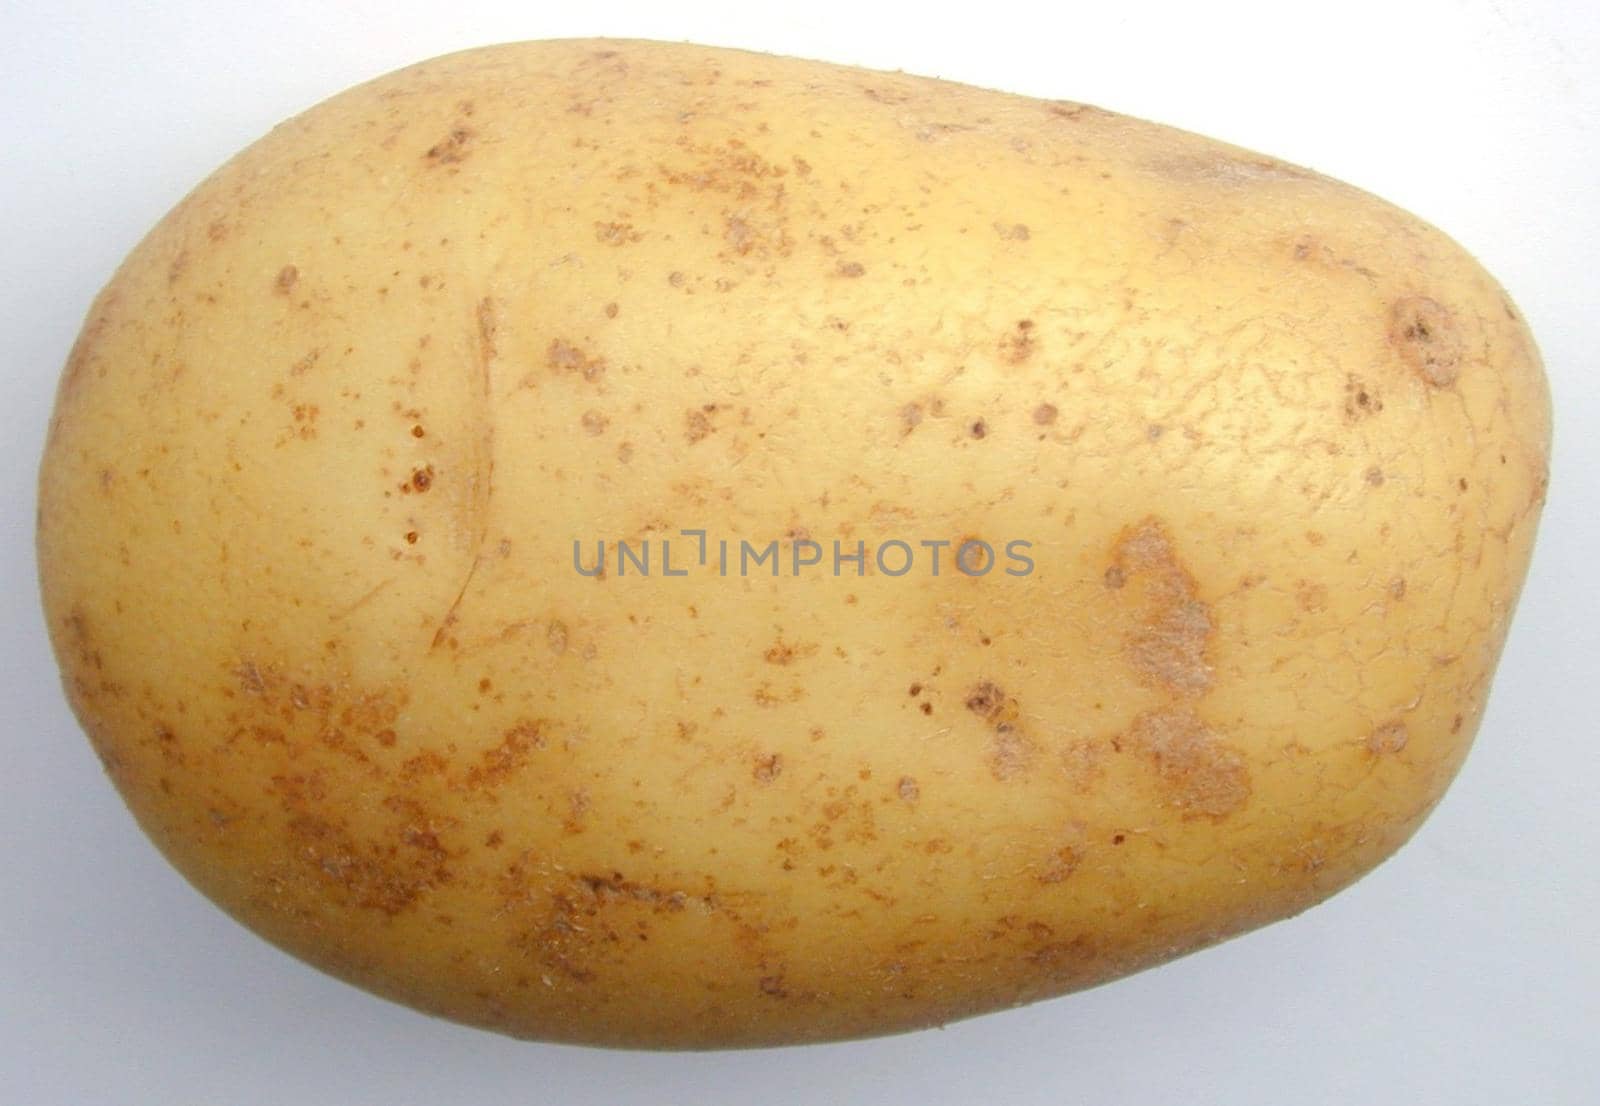 Close up texture of a whole fresh potato, a root vegetable rich in carbohydrate and nutrients